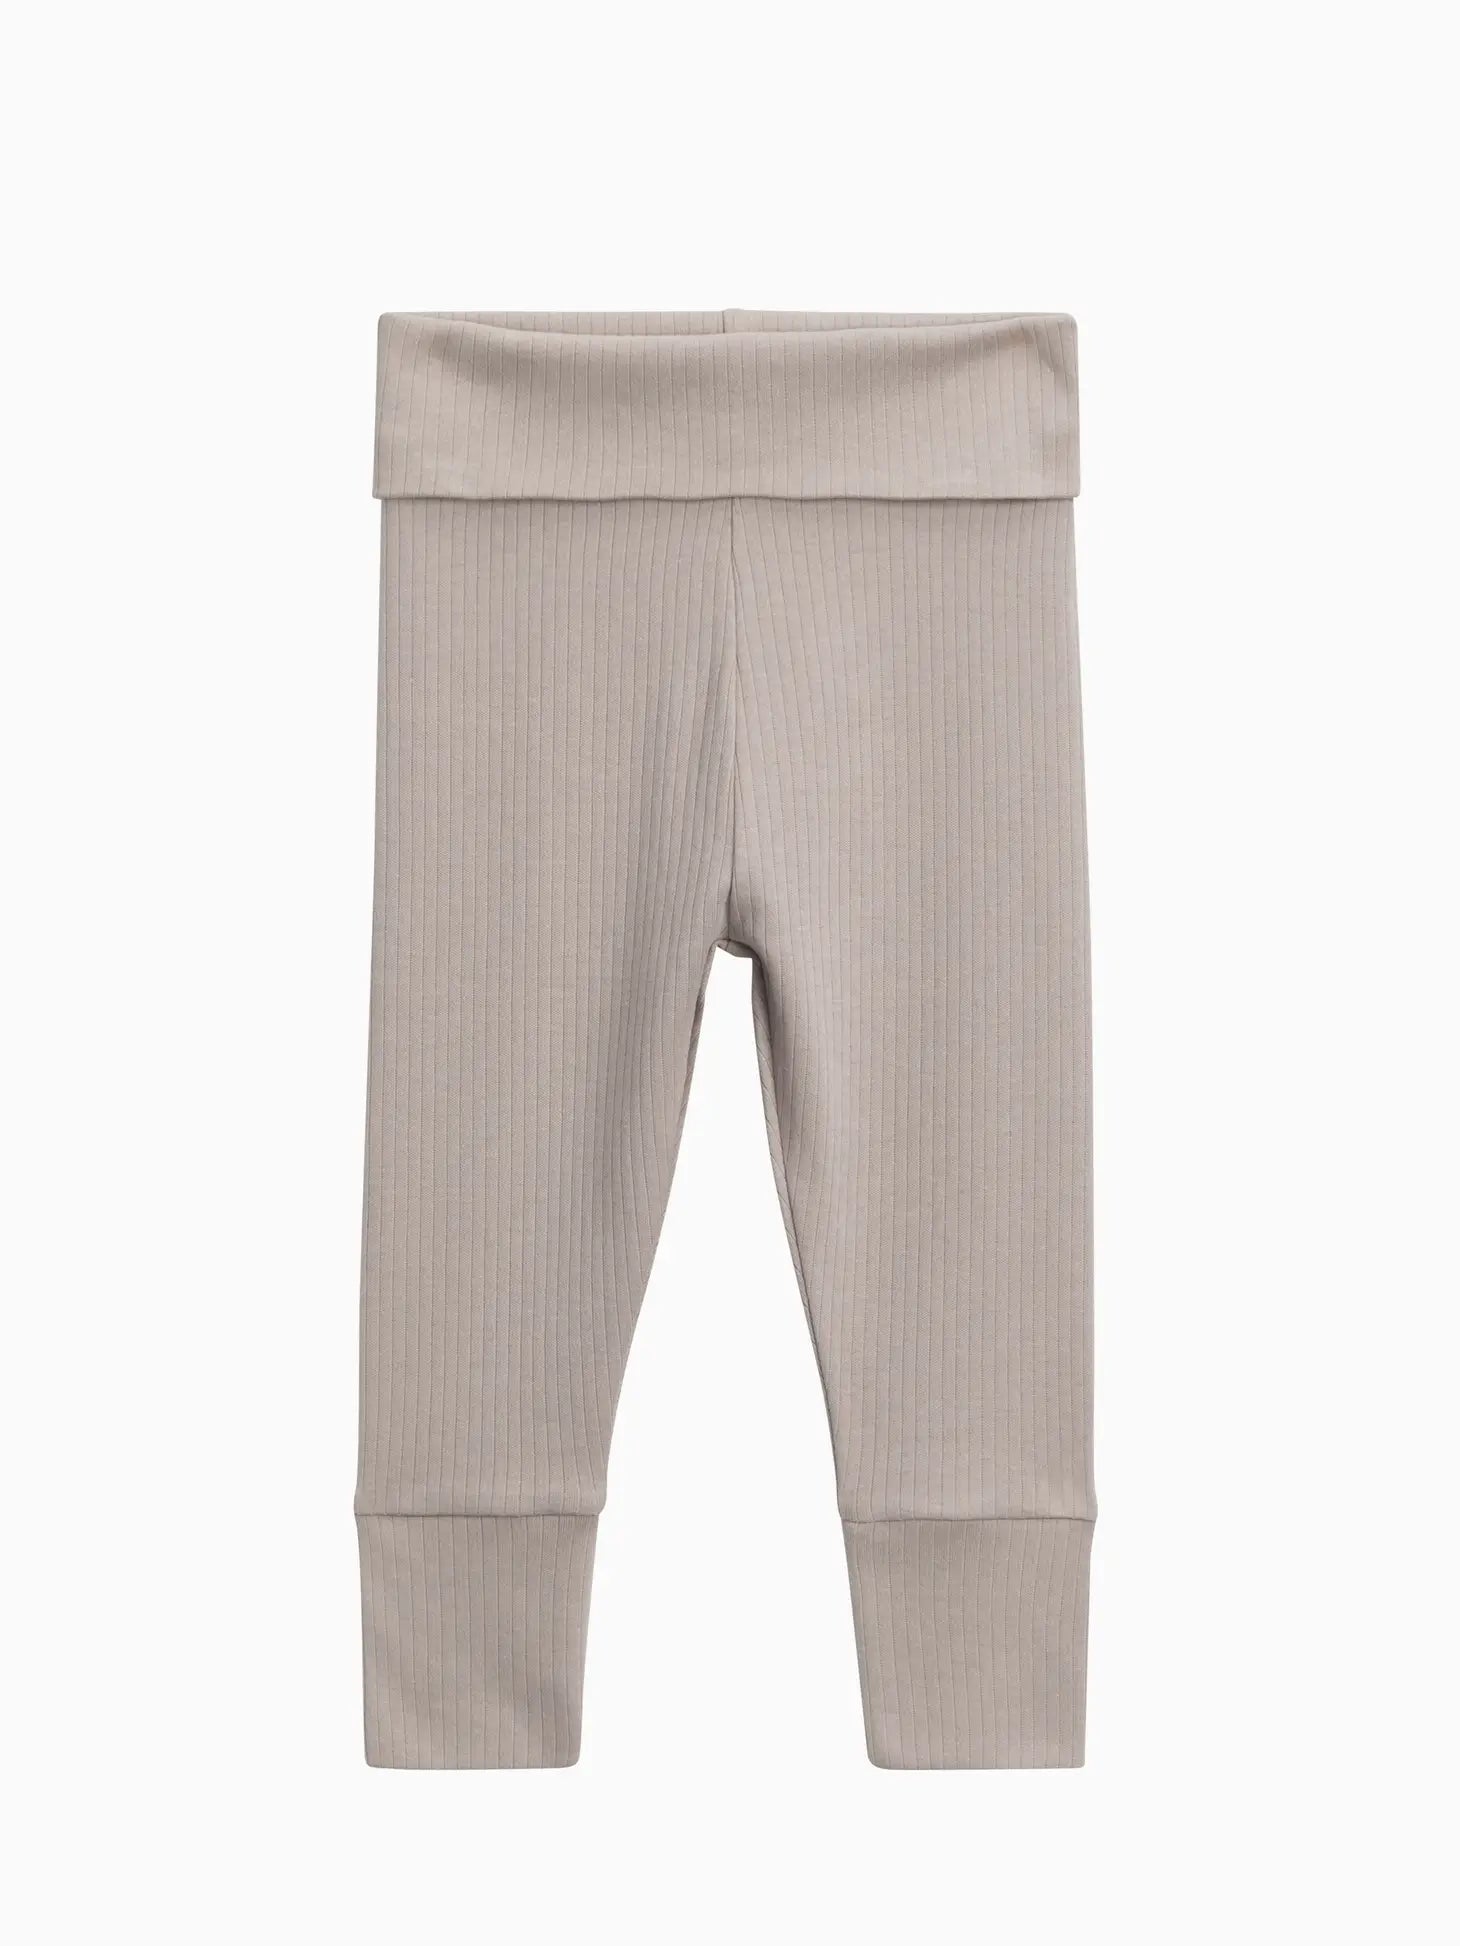 Ribbed Foldover Joggers - Dove - Lulie